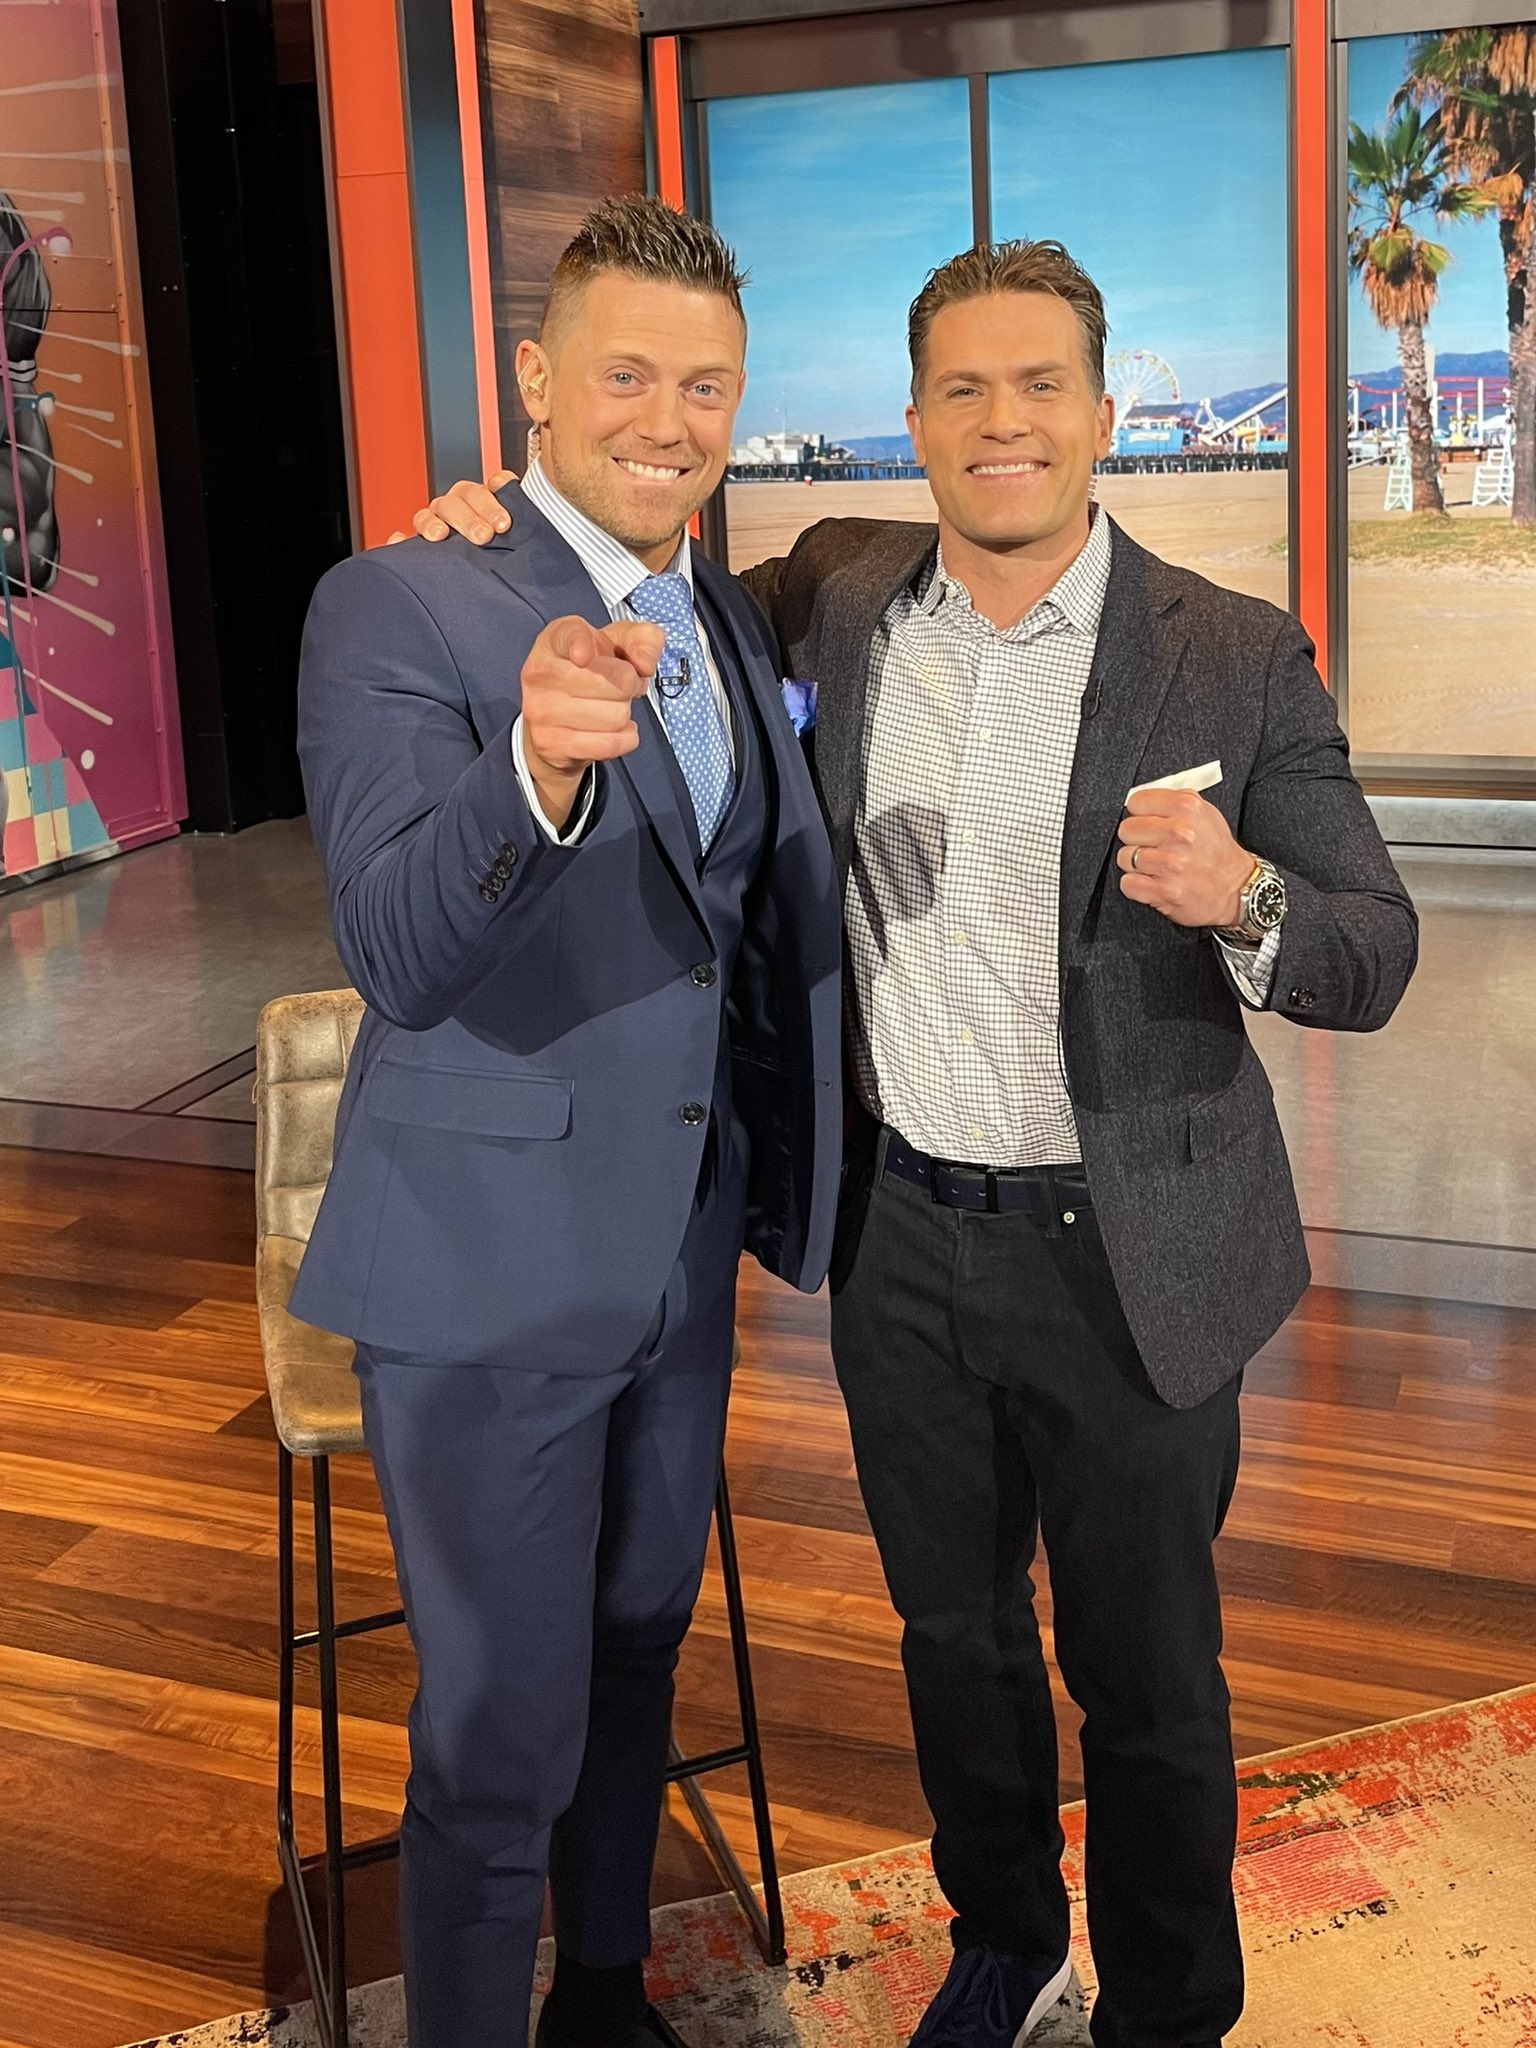 Kyle Brandt on X: 'I've known this guy over 20 years. Very proud